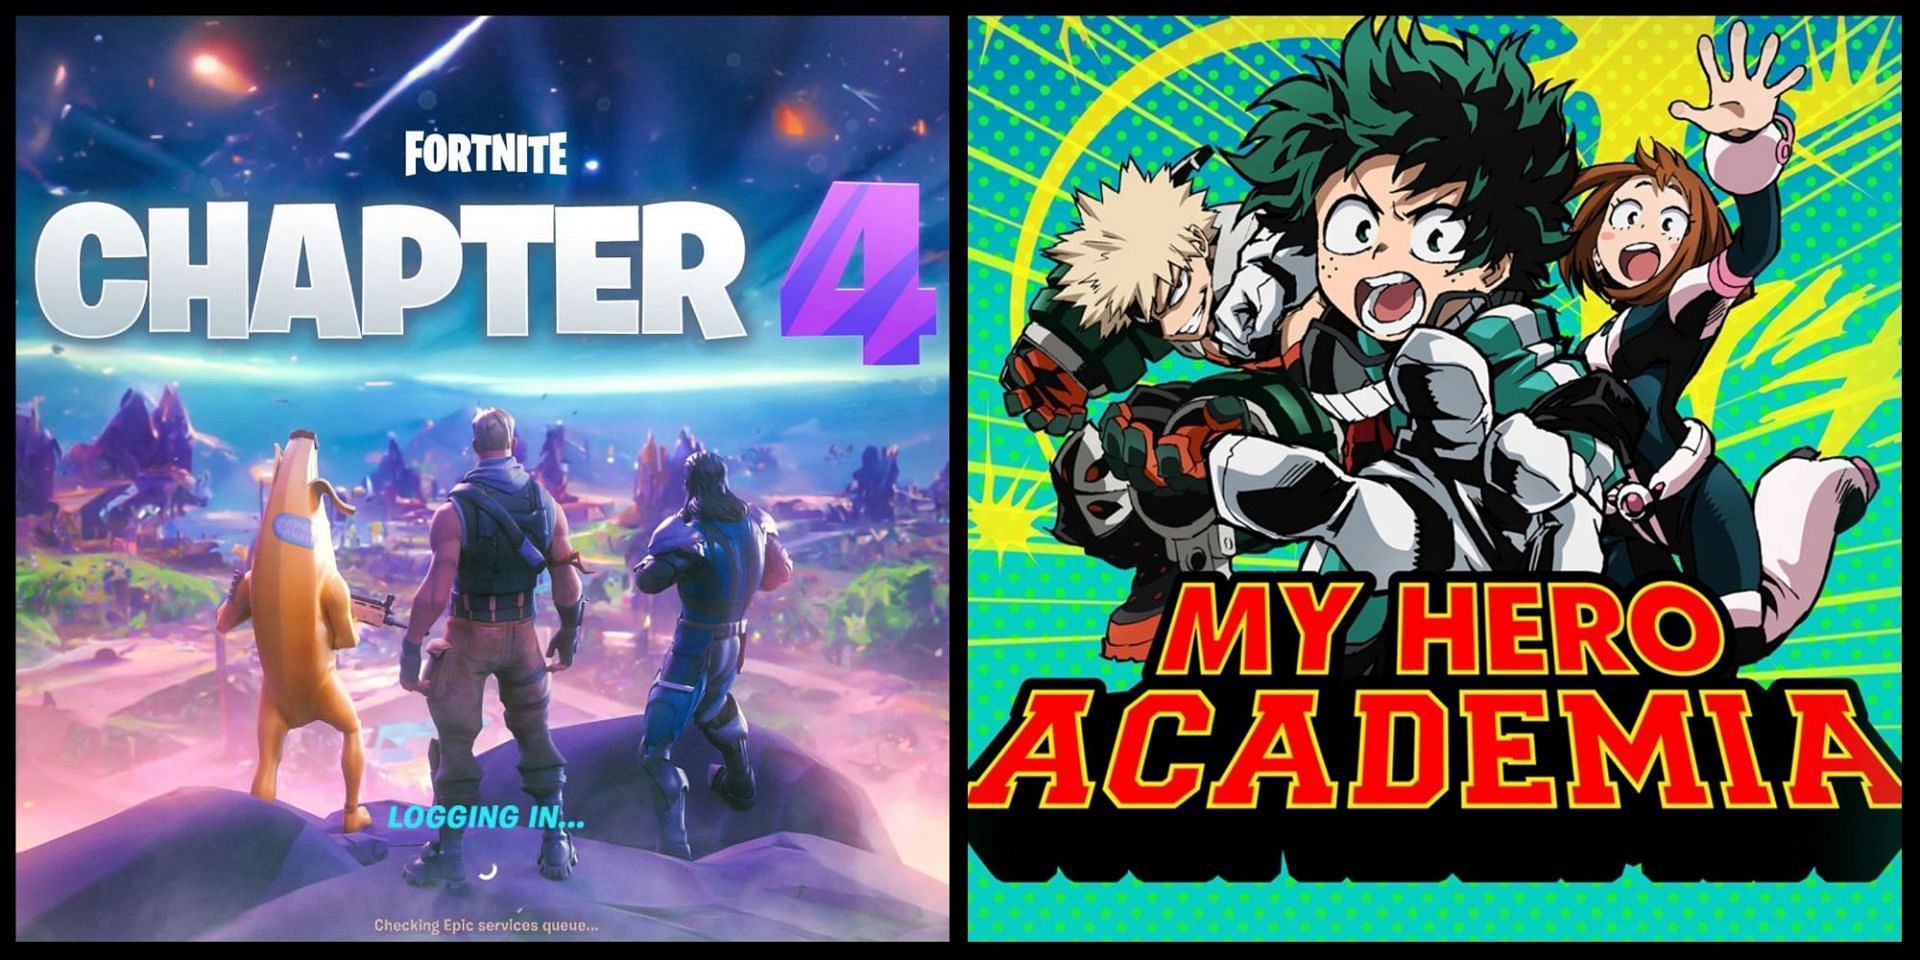 Epic Reveals the Release Date of Next Anime Collab in Fortnite - N4G